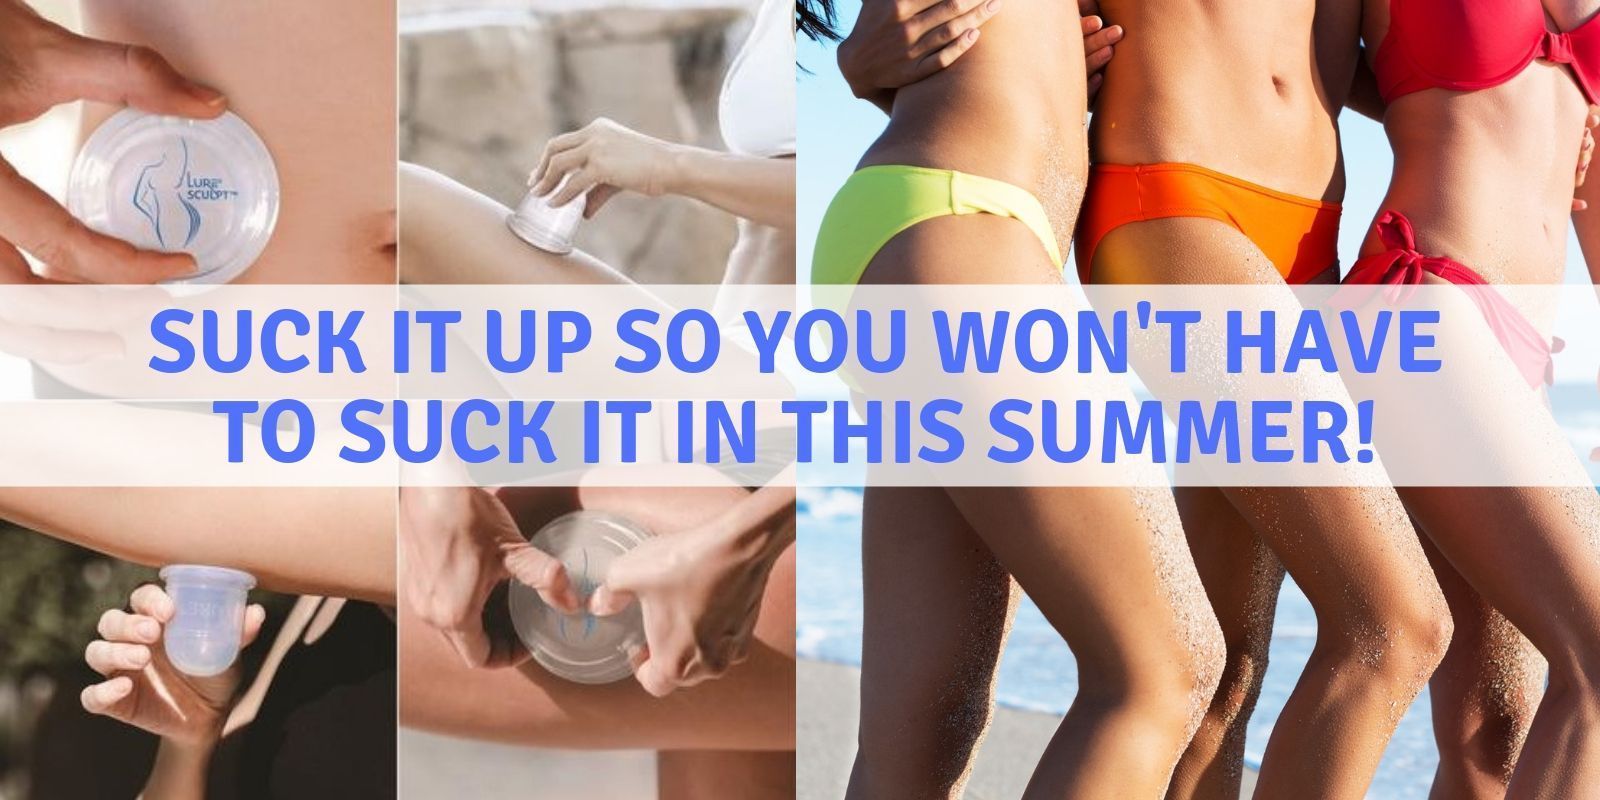 SUCK IT UP SO YOU WON'T HAVE TO SUCK IT IN THIS SUMMER! - Lure Essentials